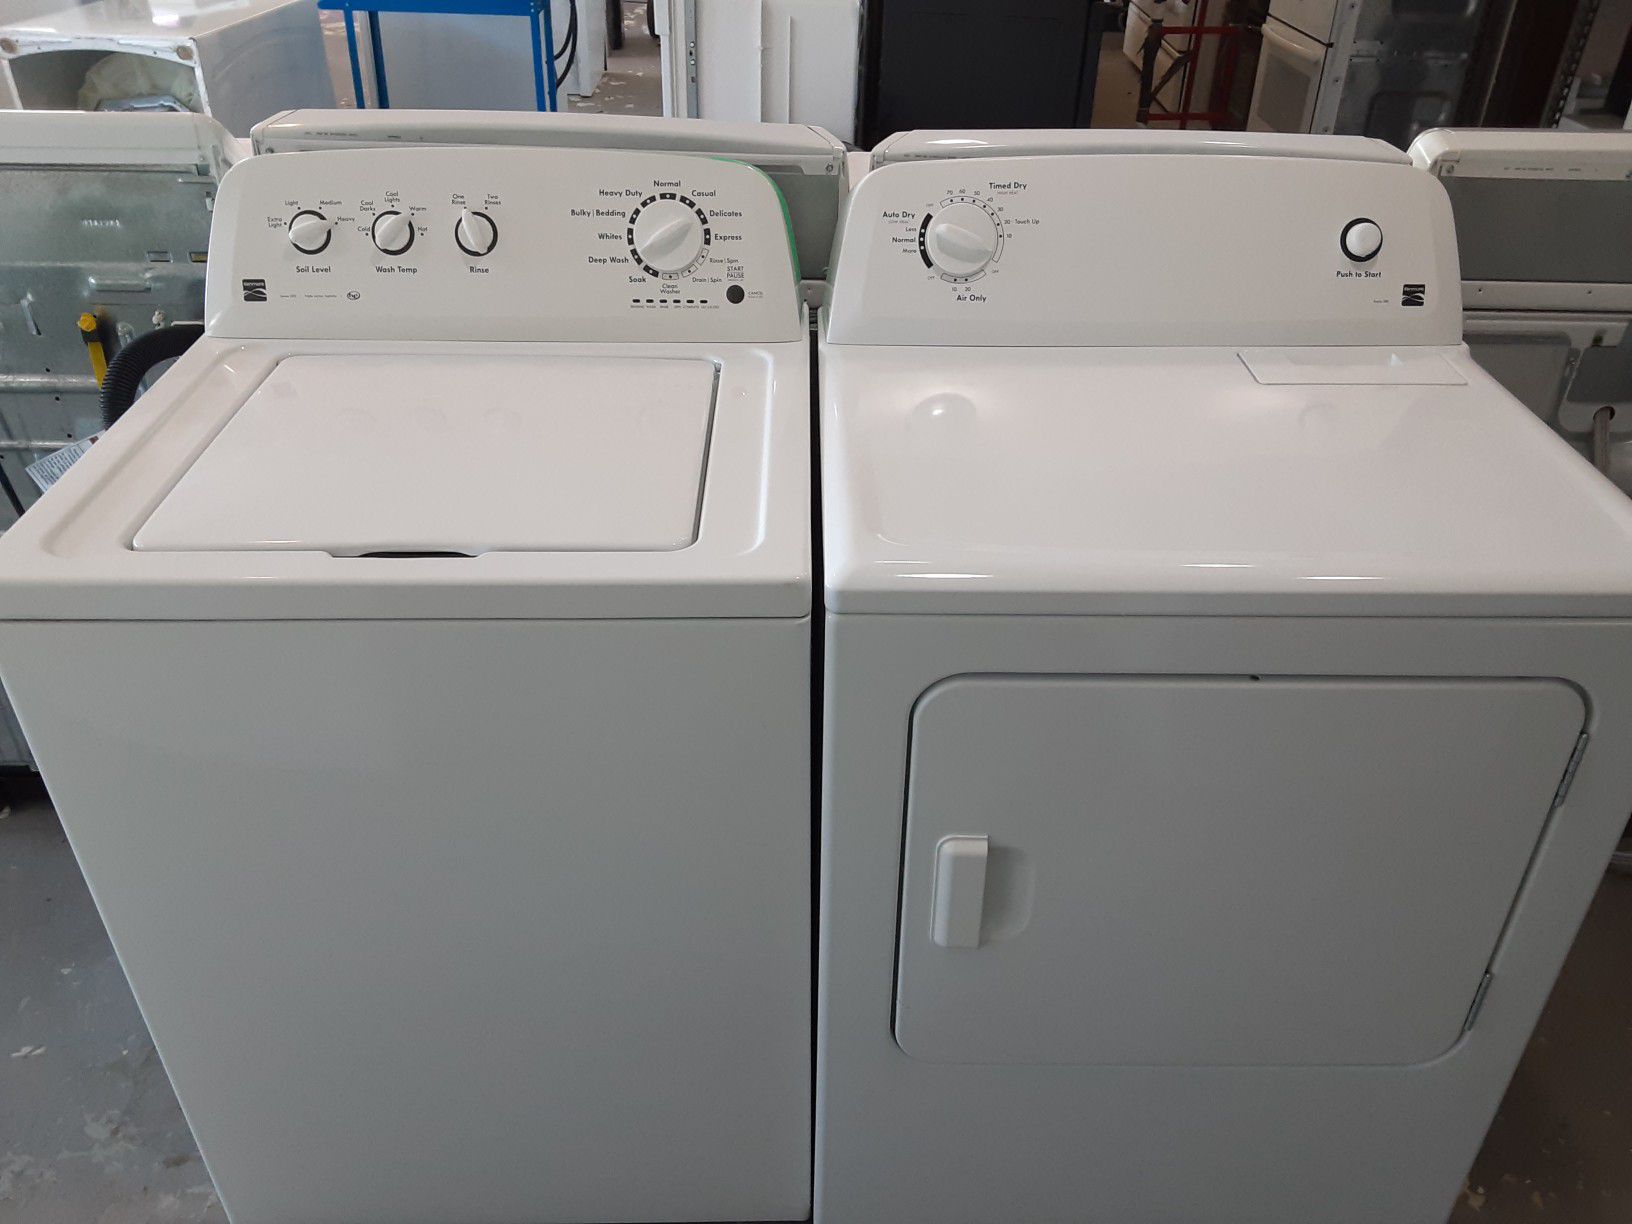 EXCELLENT CONDITION NEWER MODEL KENMORE WASHER AND DRYER SET 60 DAY WARRANTY INCLUDED DELIVERY AND INSTALLATION AVAILABLE FOR A SMALL FEE!!